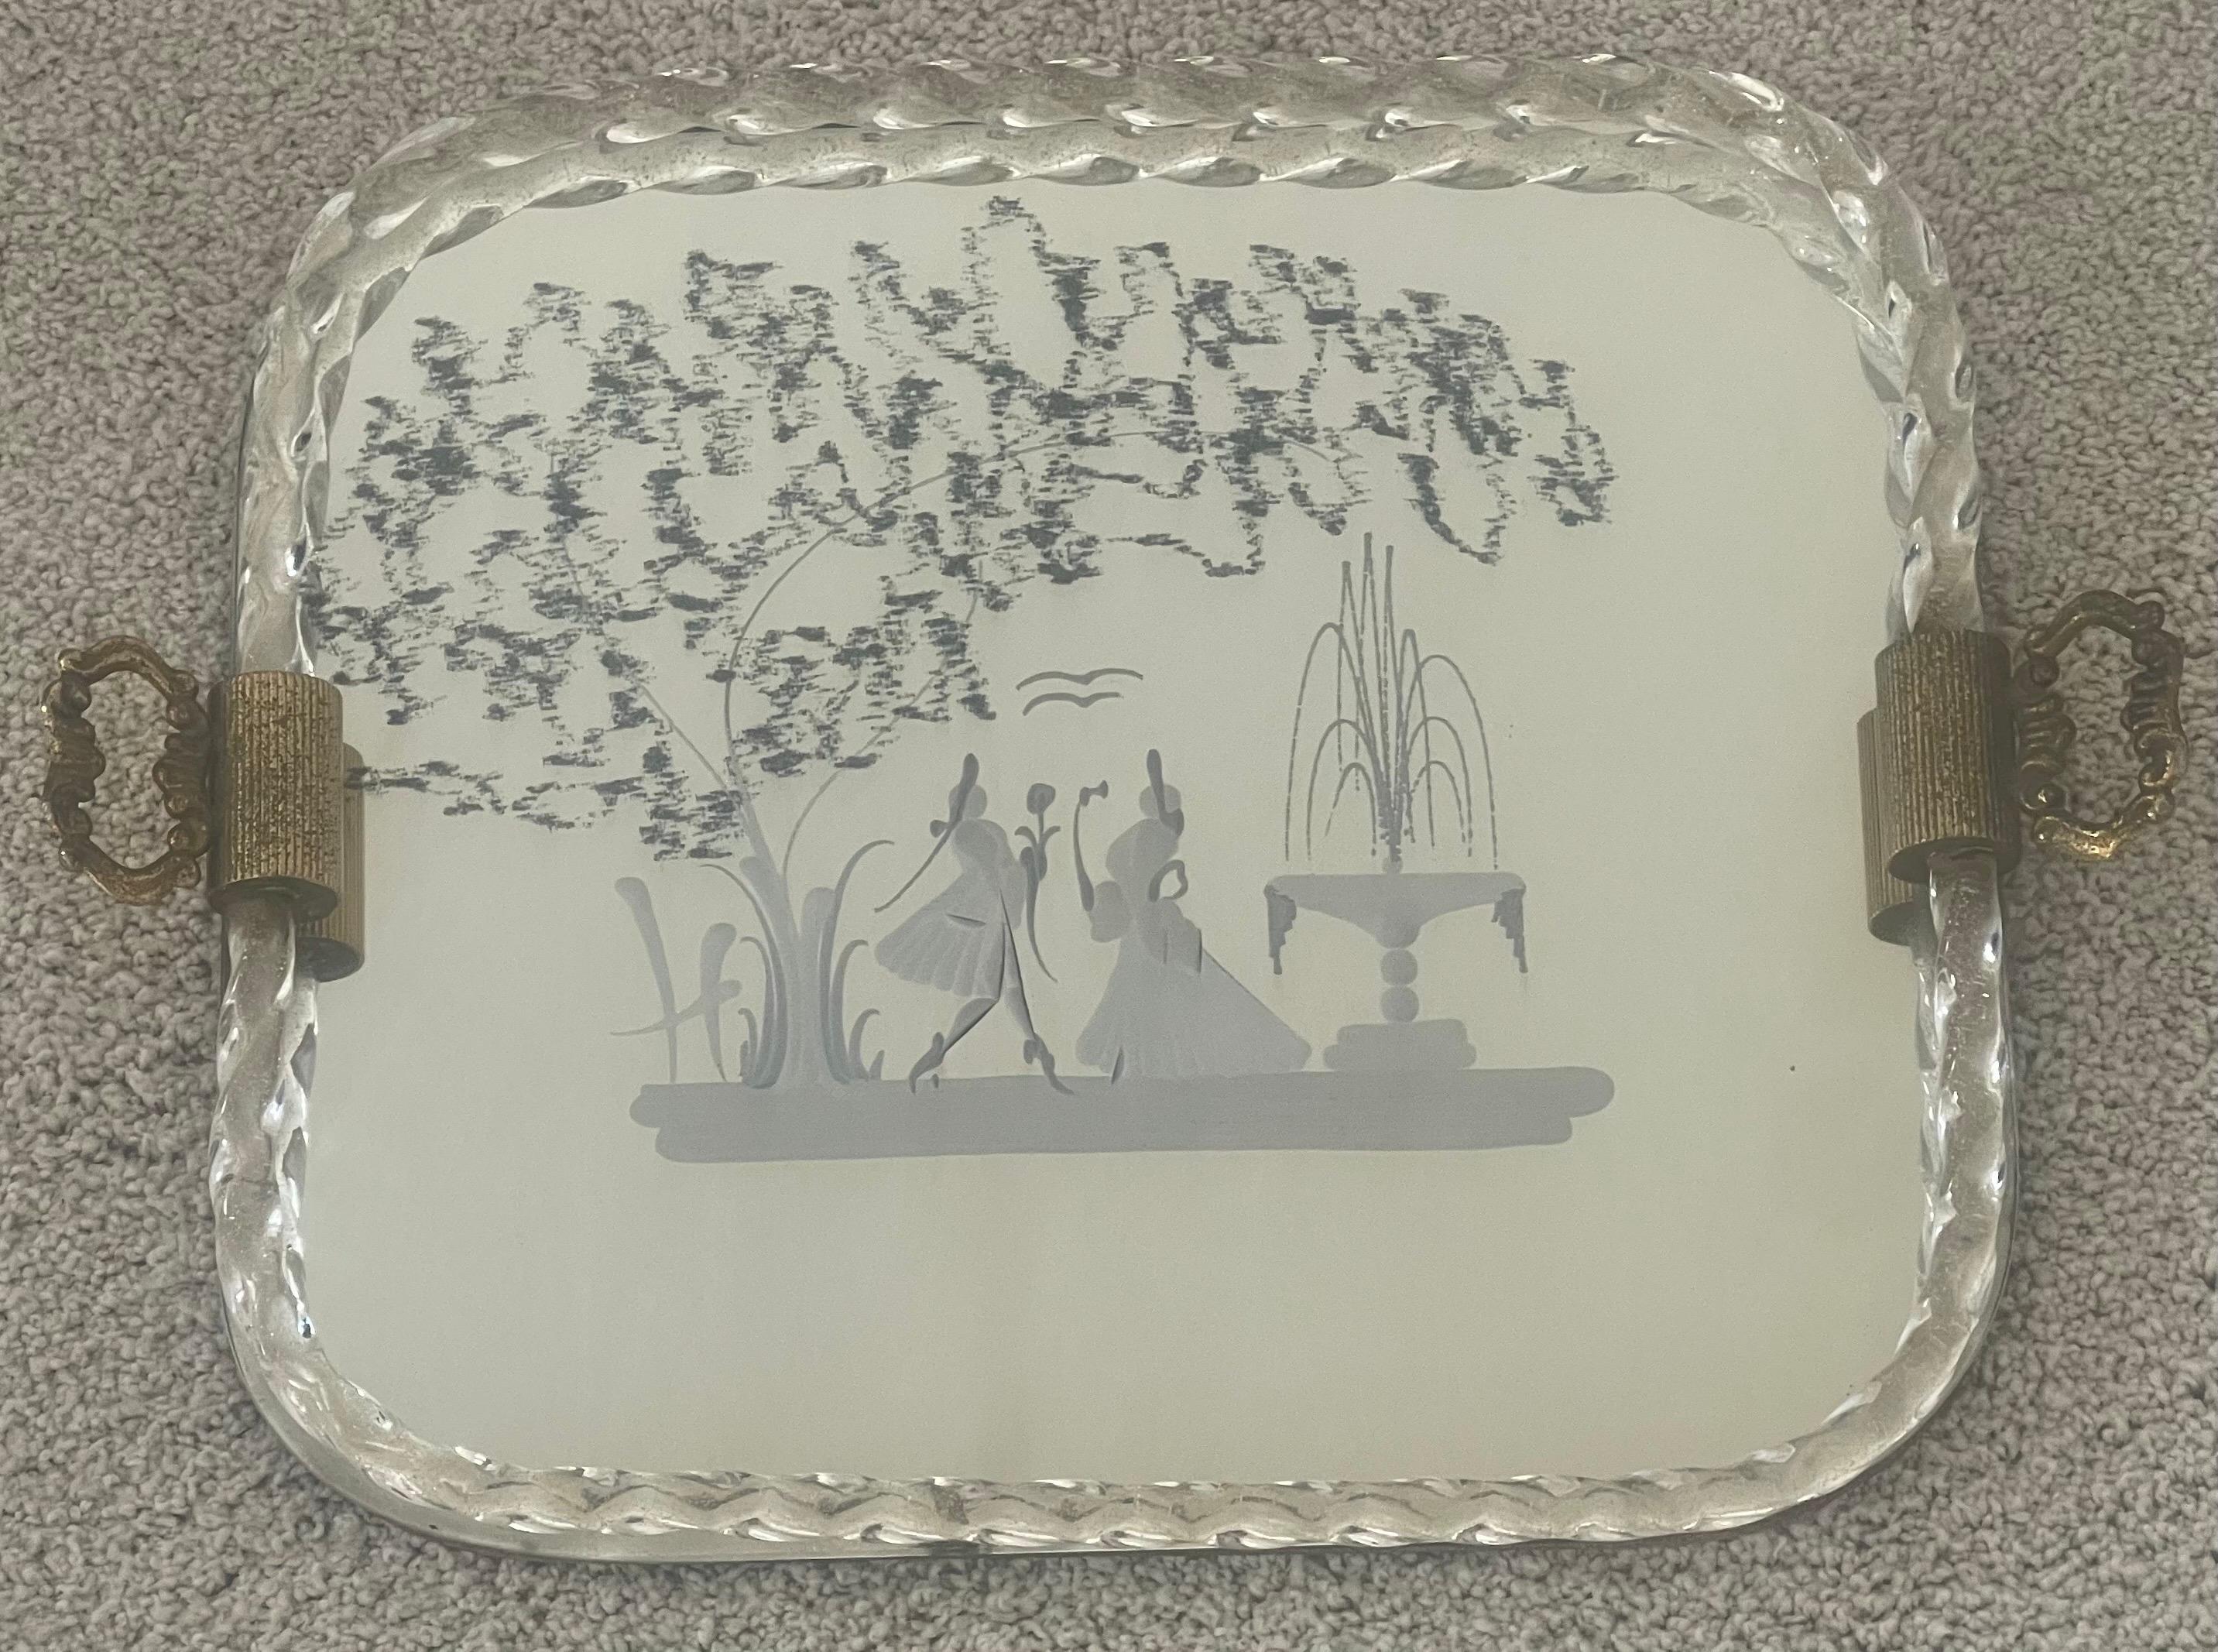 Mirrored Engraved Glass Serving Tray by Ercole Barovier for Murano Glass For Sale 1